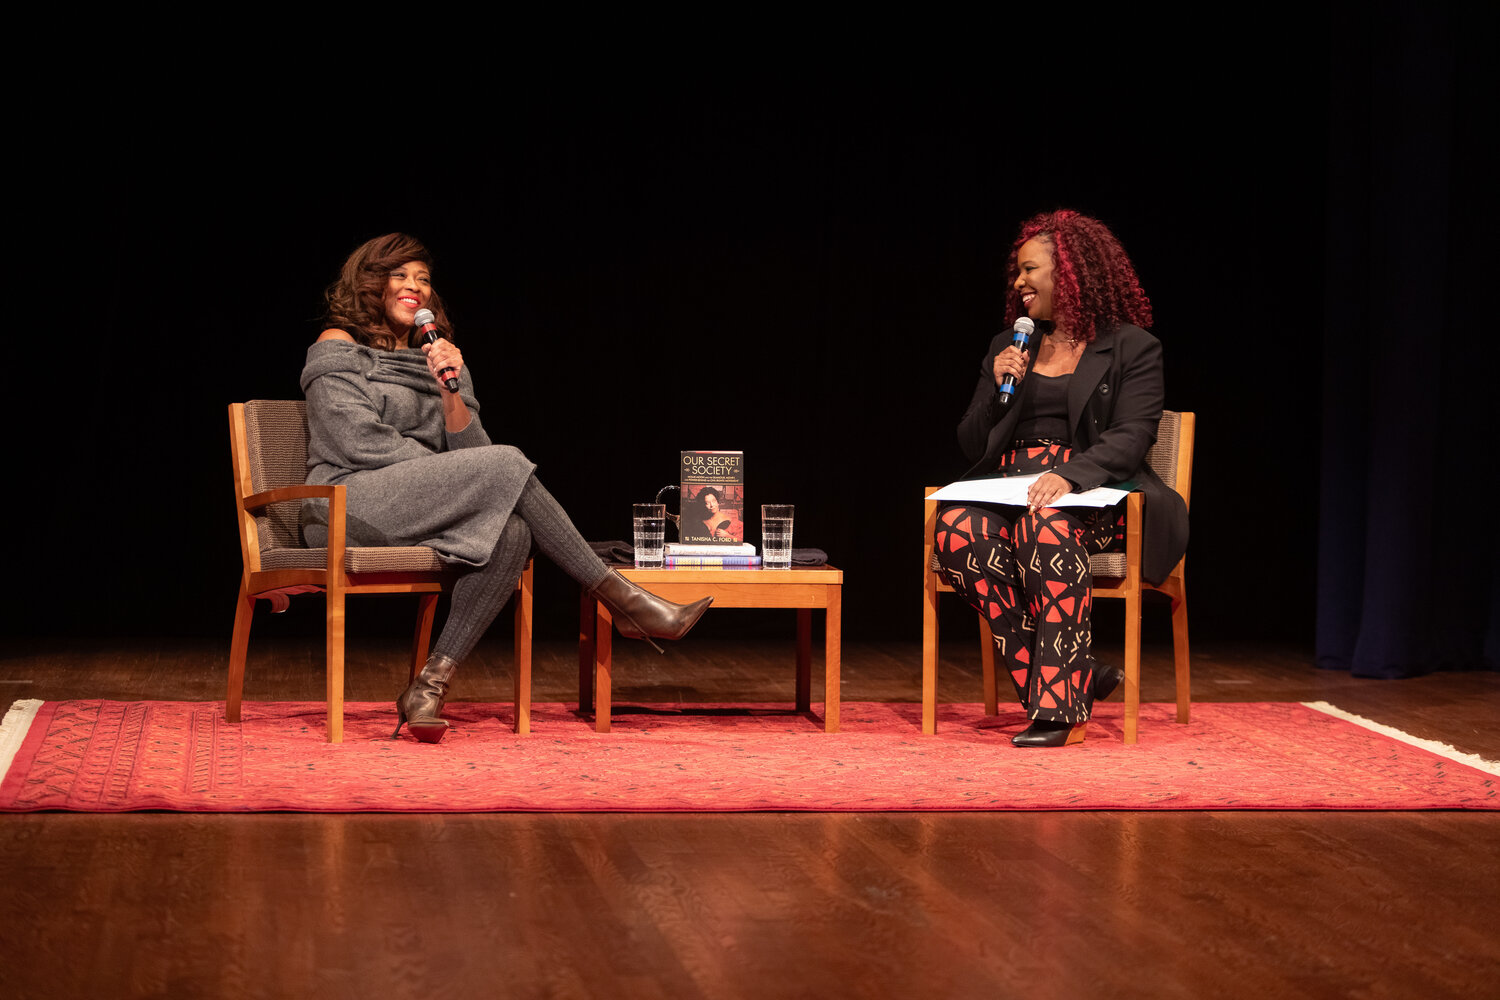 Tanisha Ford (left) discusses her latest book with host Marita Gilbert, an associate dean of diversity and campus inclusion at MSU’s College of Osteopathic Medicine.